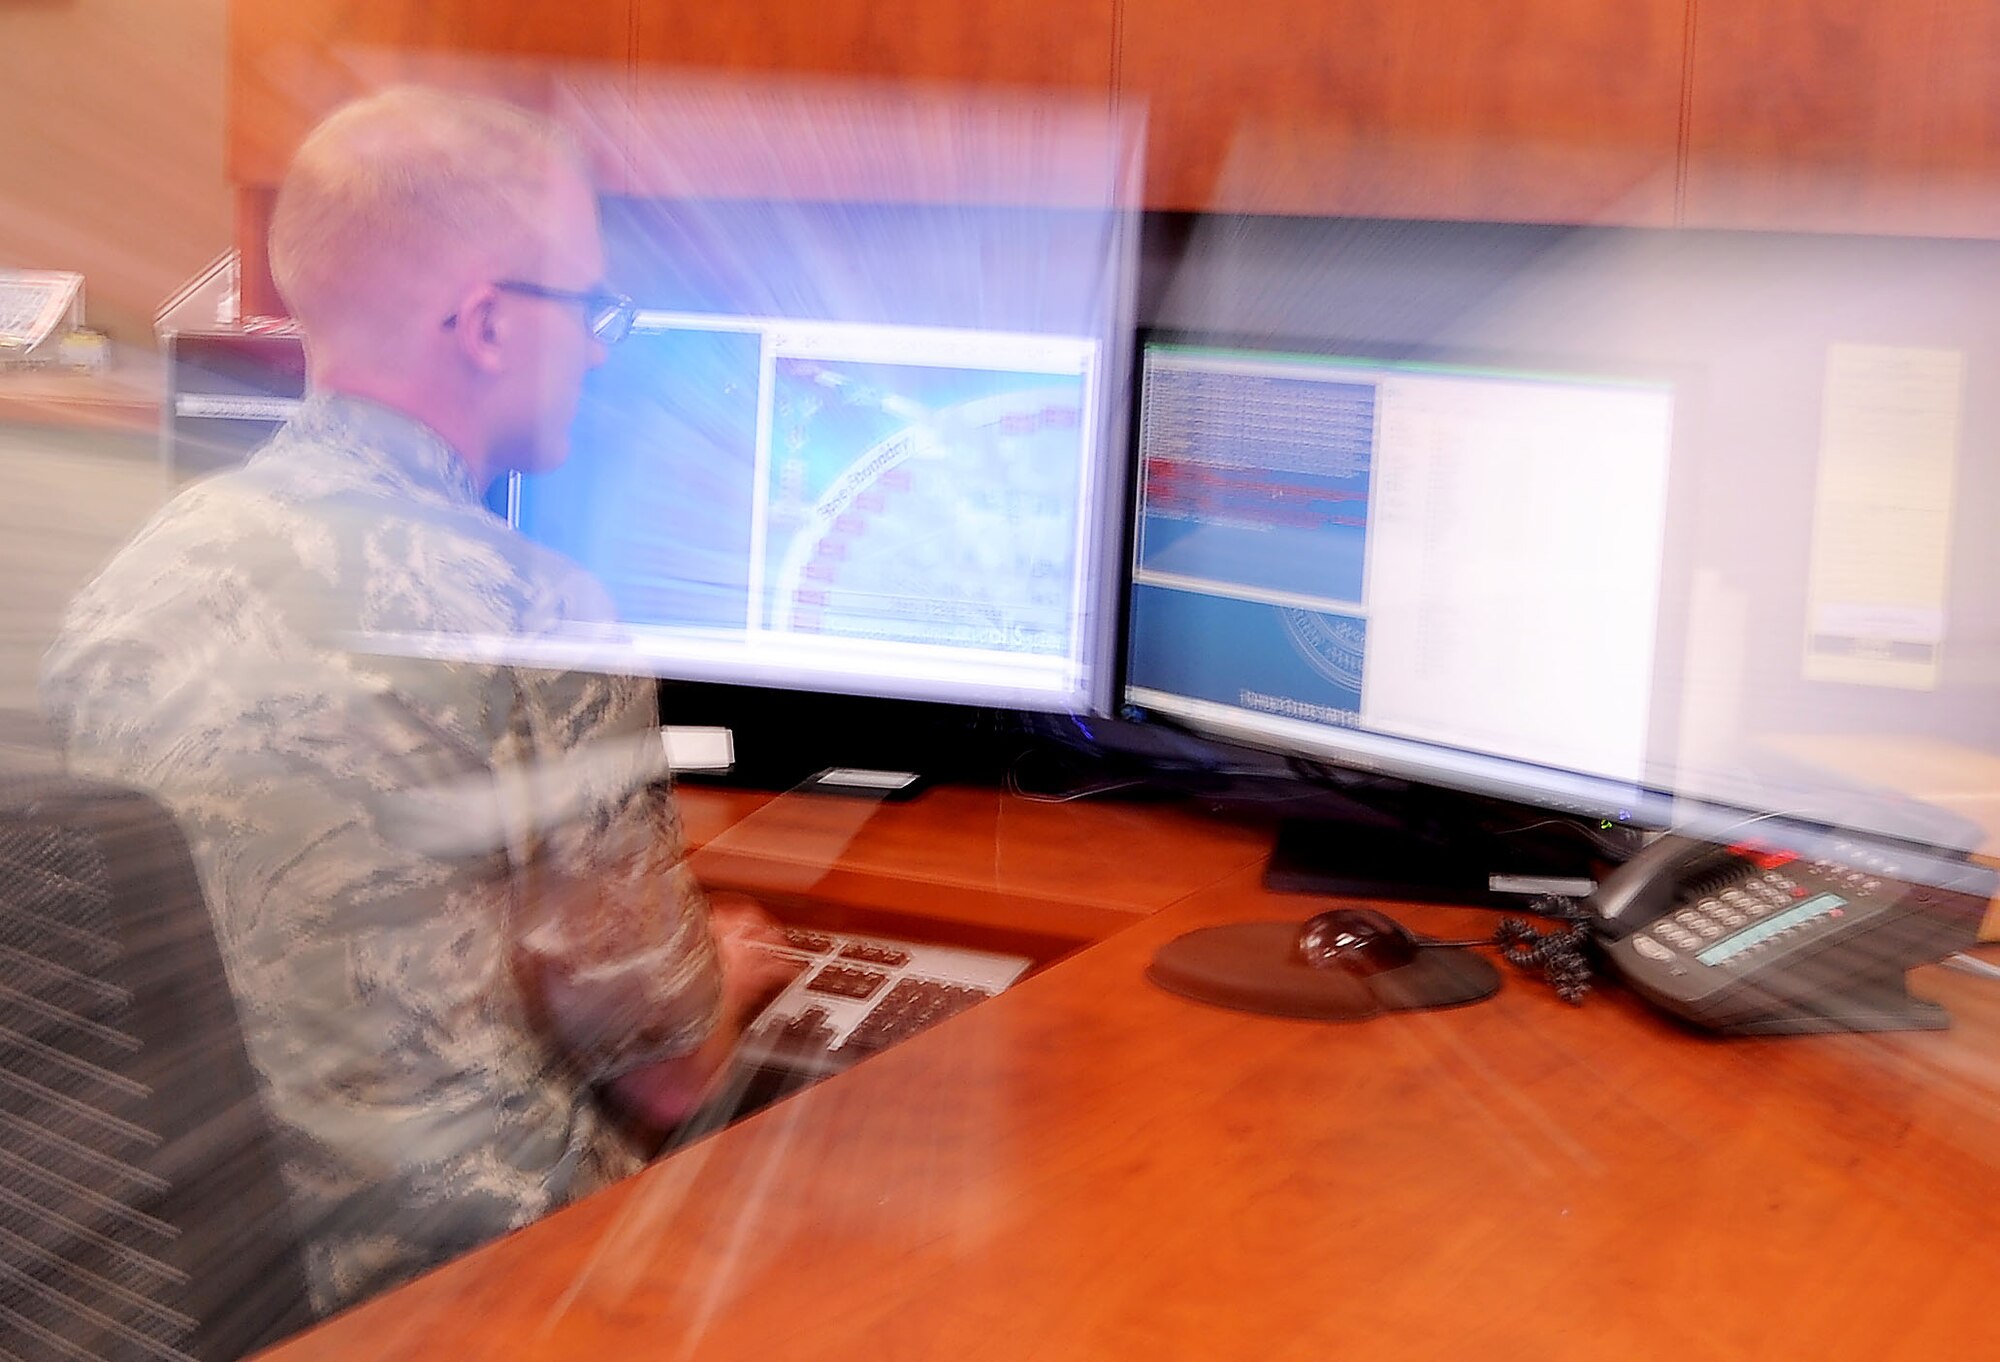 PETERSON AIR FORCE BASE, Colo. – Senior Airman Ryan Carney-Mogan, 960th Network Operations Squadron, cyber systems operator and directory services technician, simulates back end network operations on Nov. 5, 2016 here. The Directory Services section manages all users and computers for the entire Air Force Network. The 960th NOS is the only cyberspace operations group in the Air Force Reserve Command. (U.S. Air Force graphic/Staff Sgt. Amber Sorsek)